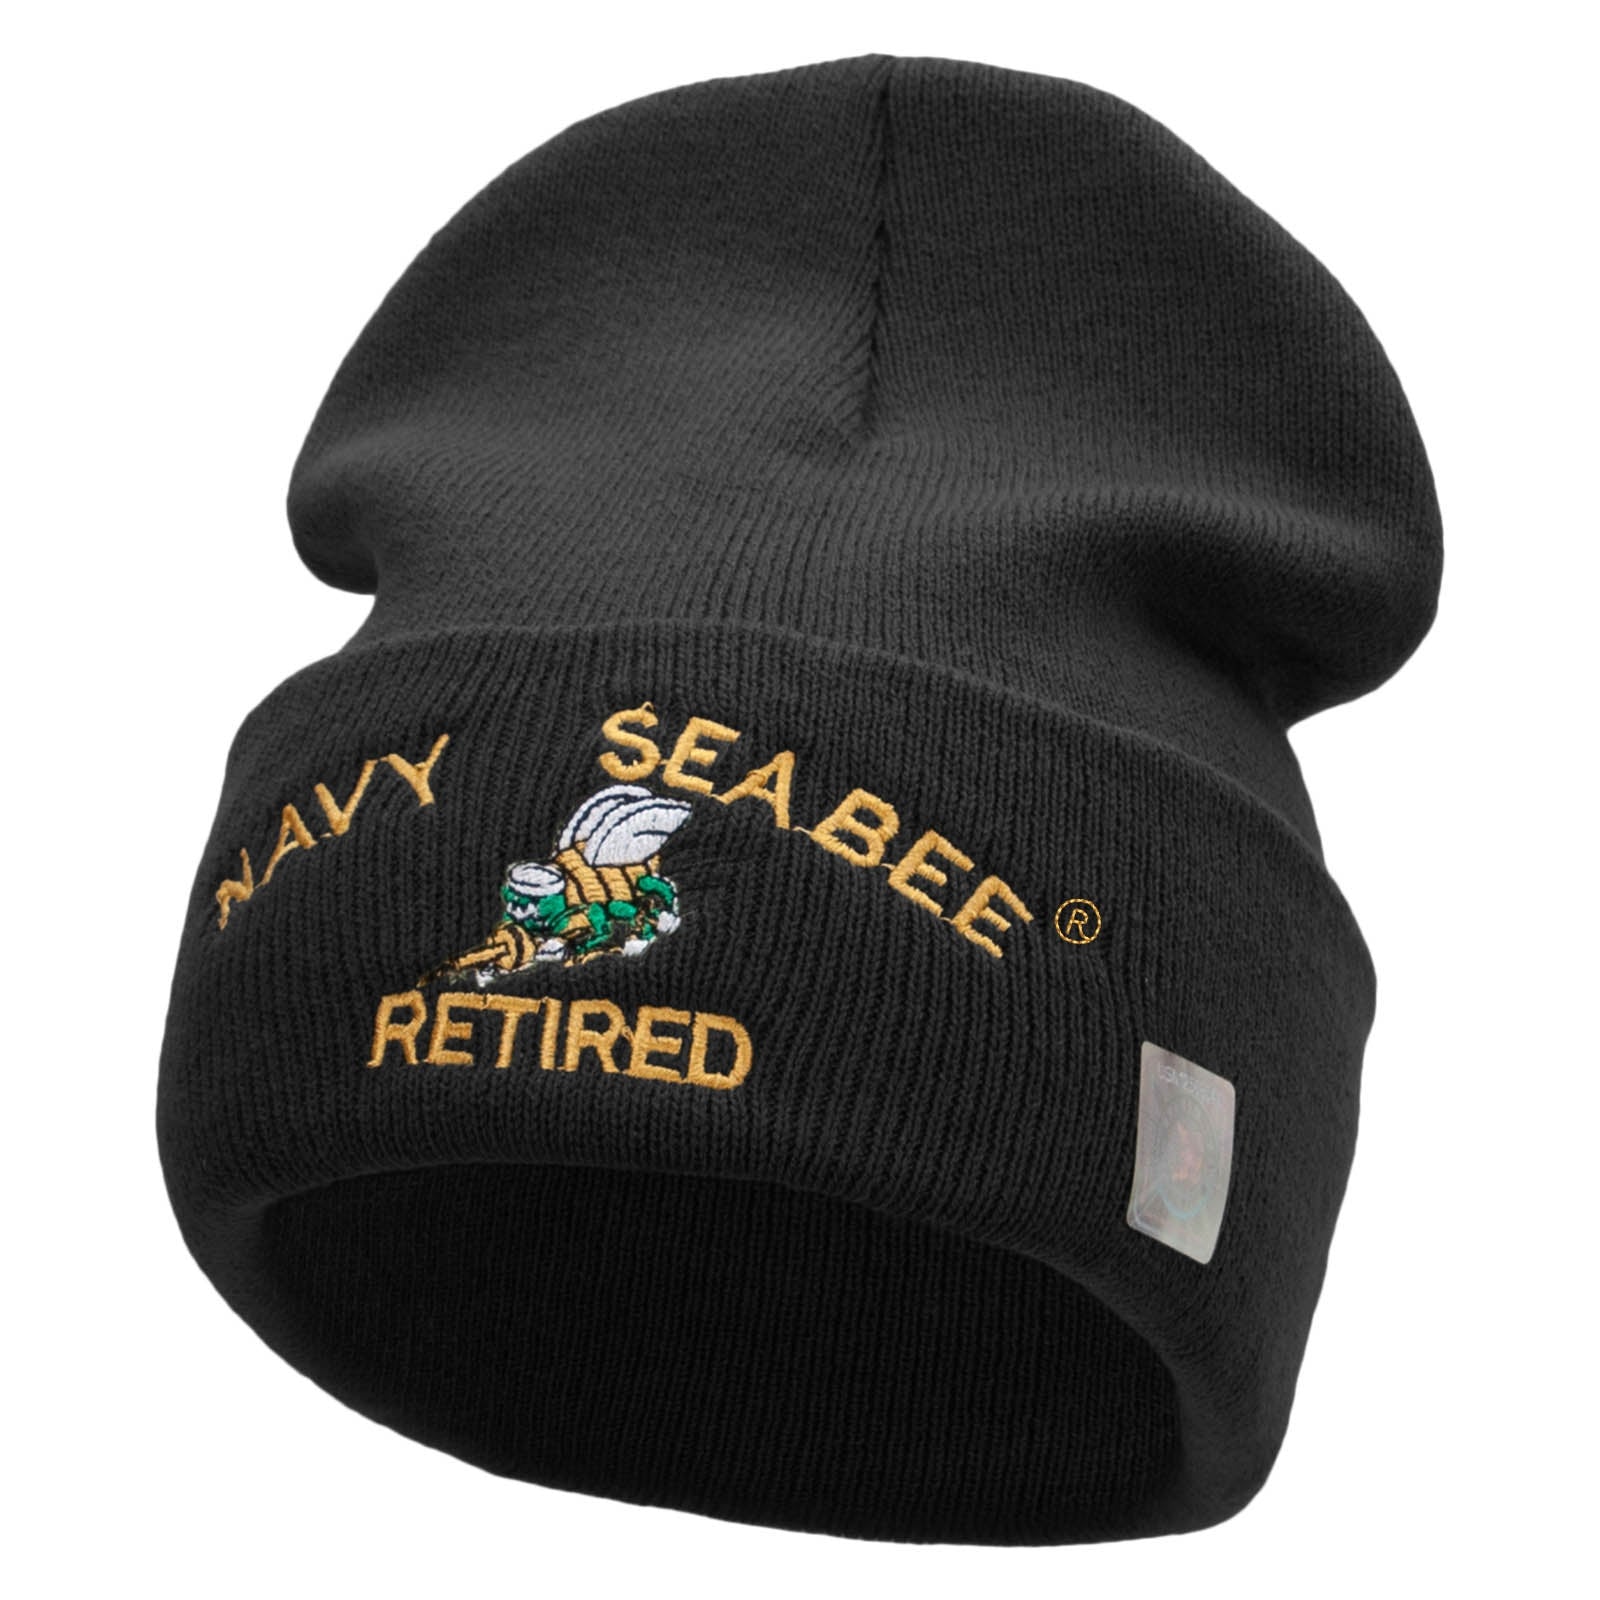 Licensed Navy Seabee Retired Logo Embroidered Long Beanie Made in USA - Black OSFM